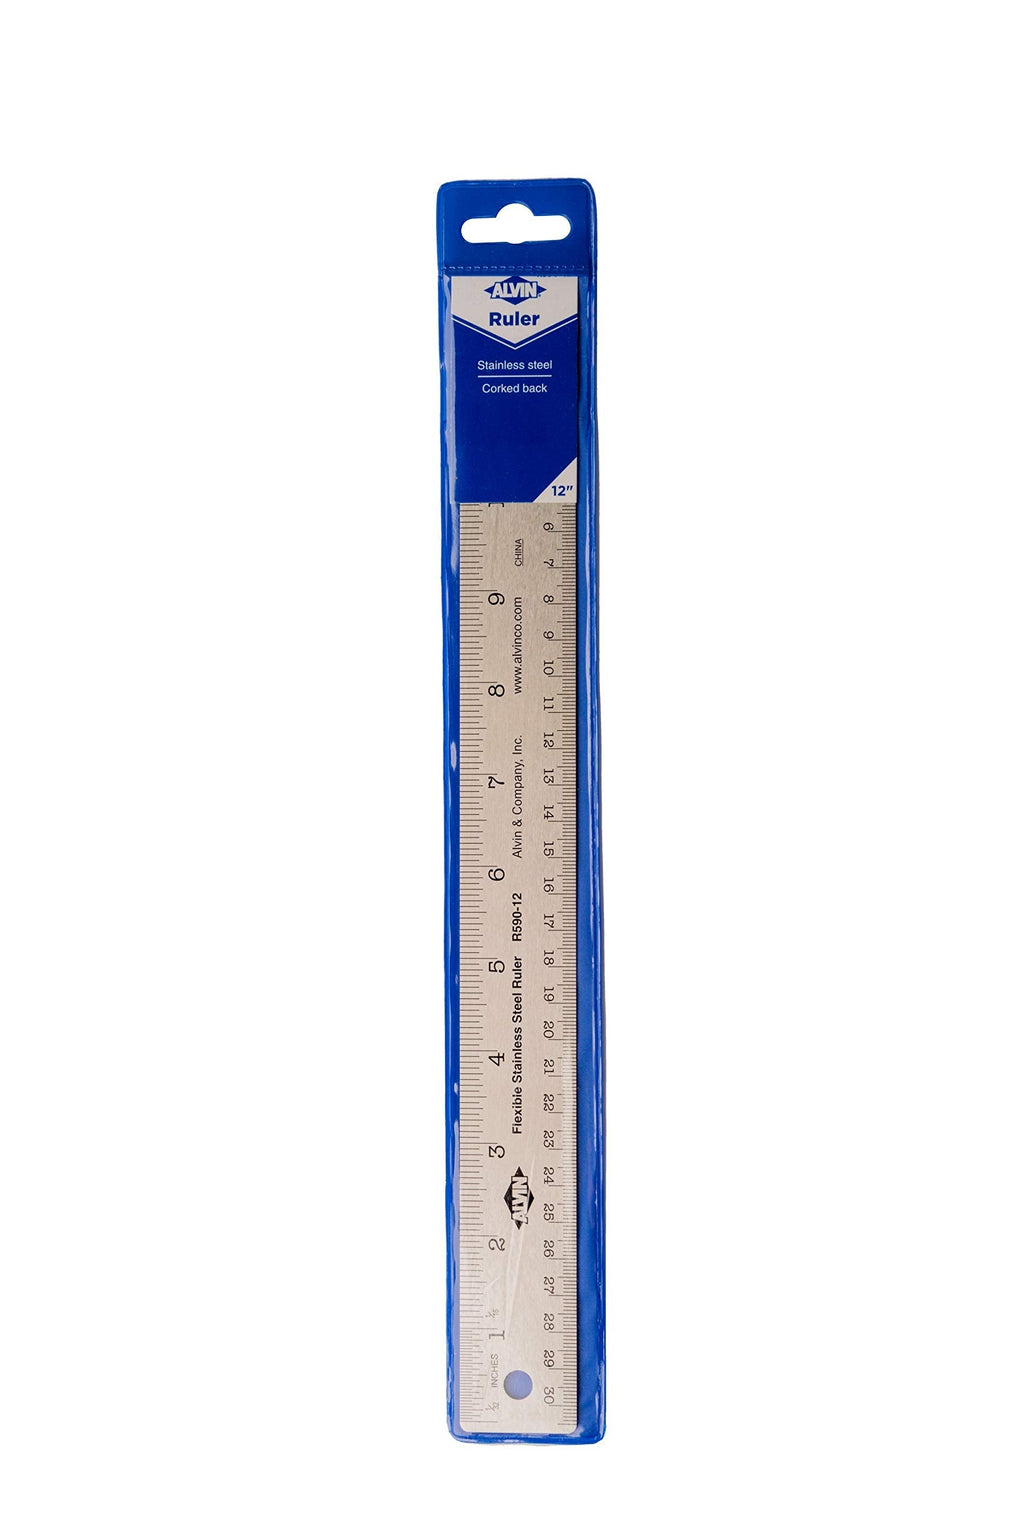  [AUSTRALIA] - ALVIN R590-12 Stainless Steel Ruler, Drawing and Design Tool for Students and Professionals, Great for Drafting, Architecture, Engineering, and Art - Stainless Steel Ruler, Metal, 12 Inches